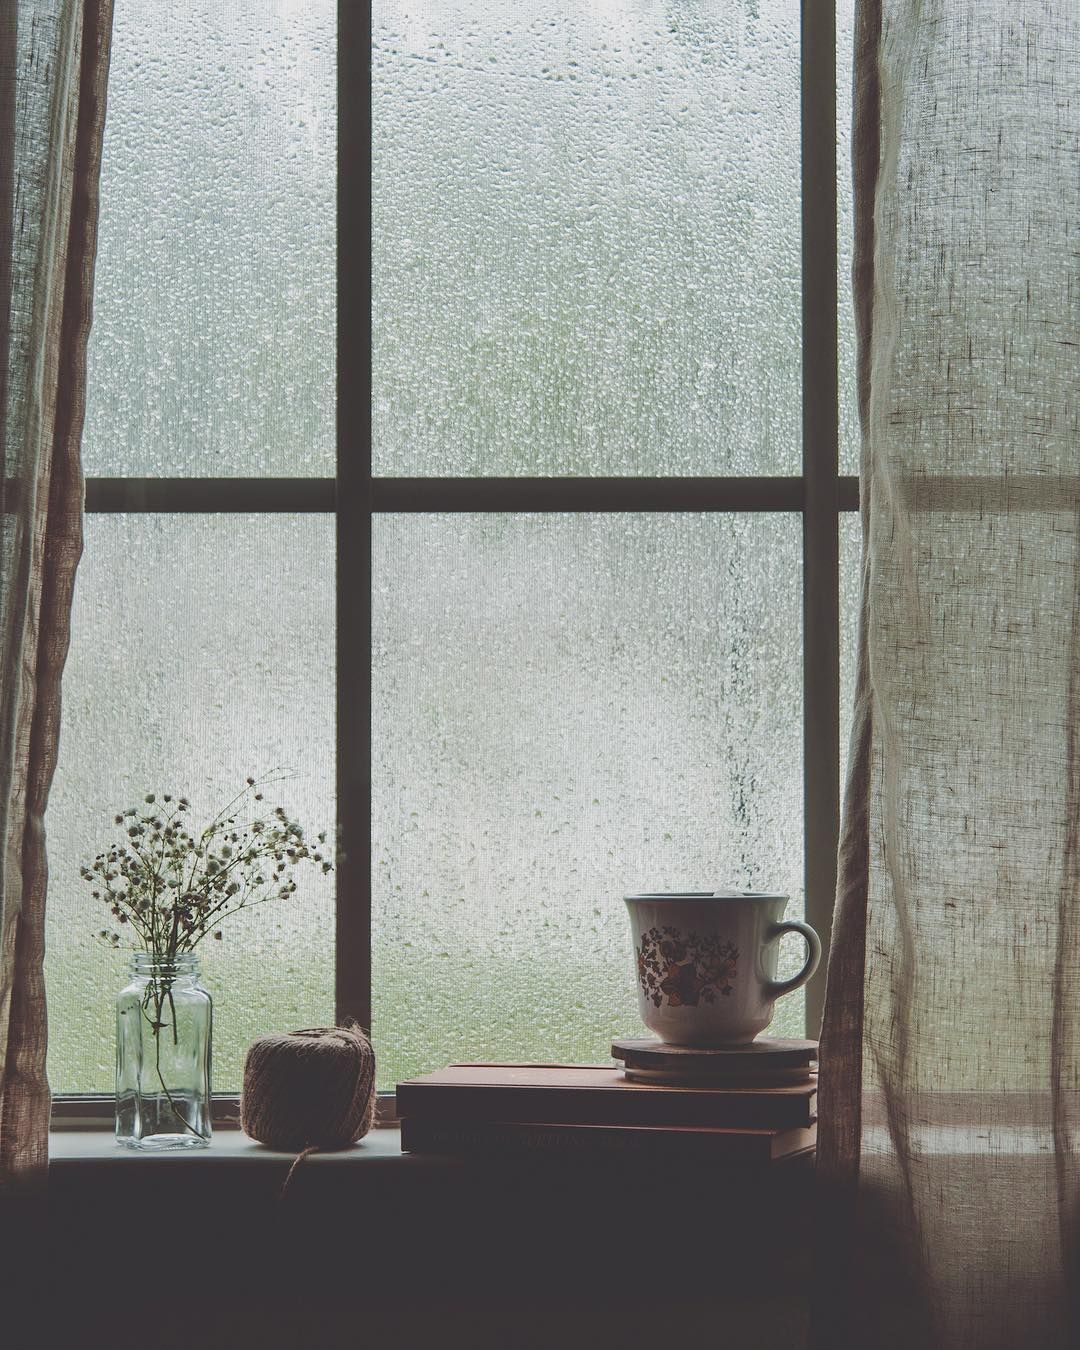 Instagram photo of our tea time on a rainy day #aesthetic #photography #rain #homebody #moodboard. Rainy day aesthetic, Cozy rainy day, Rainy days